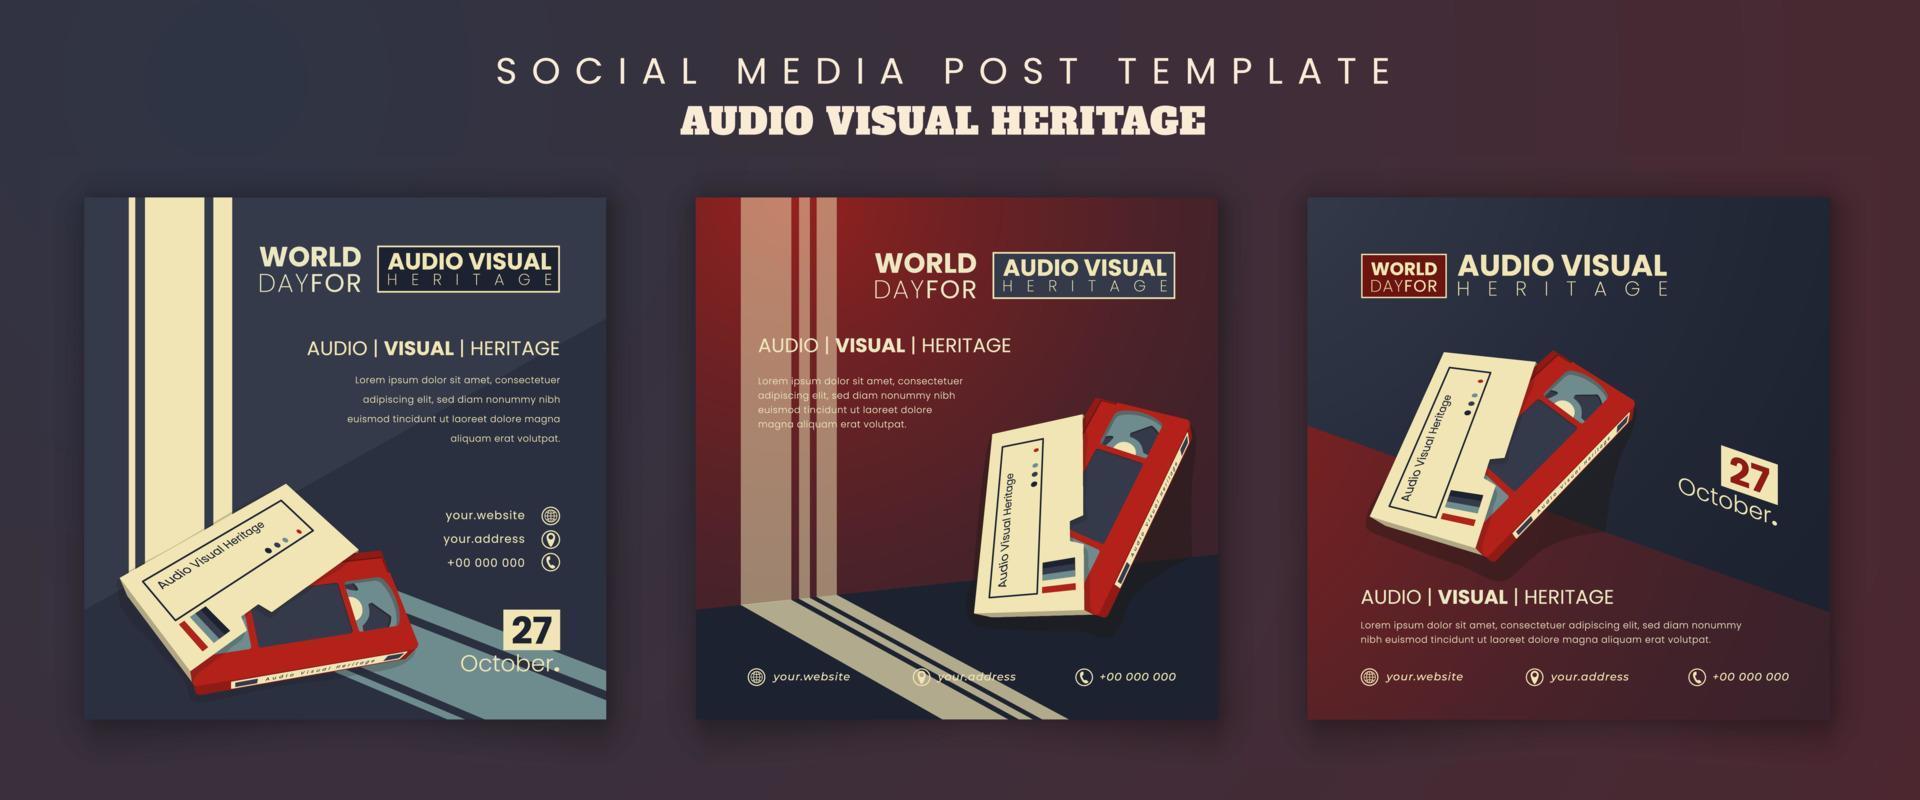 Social media post template in vintage red and blue background with old video cassette design vector